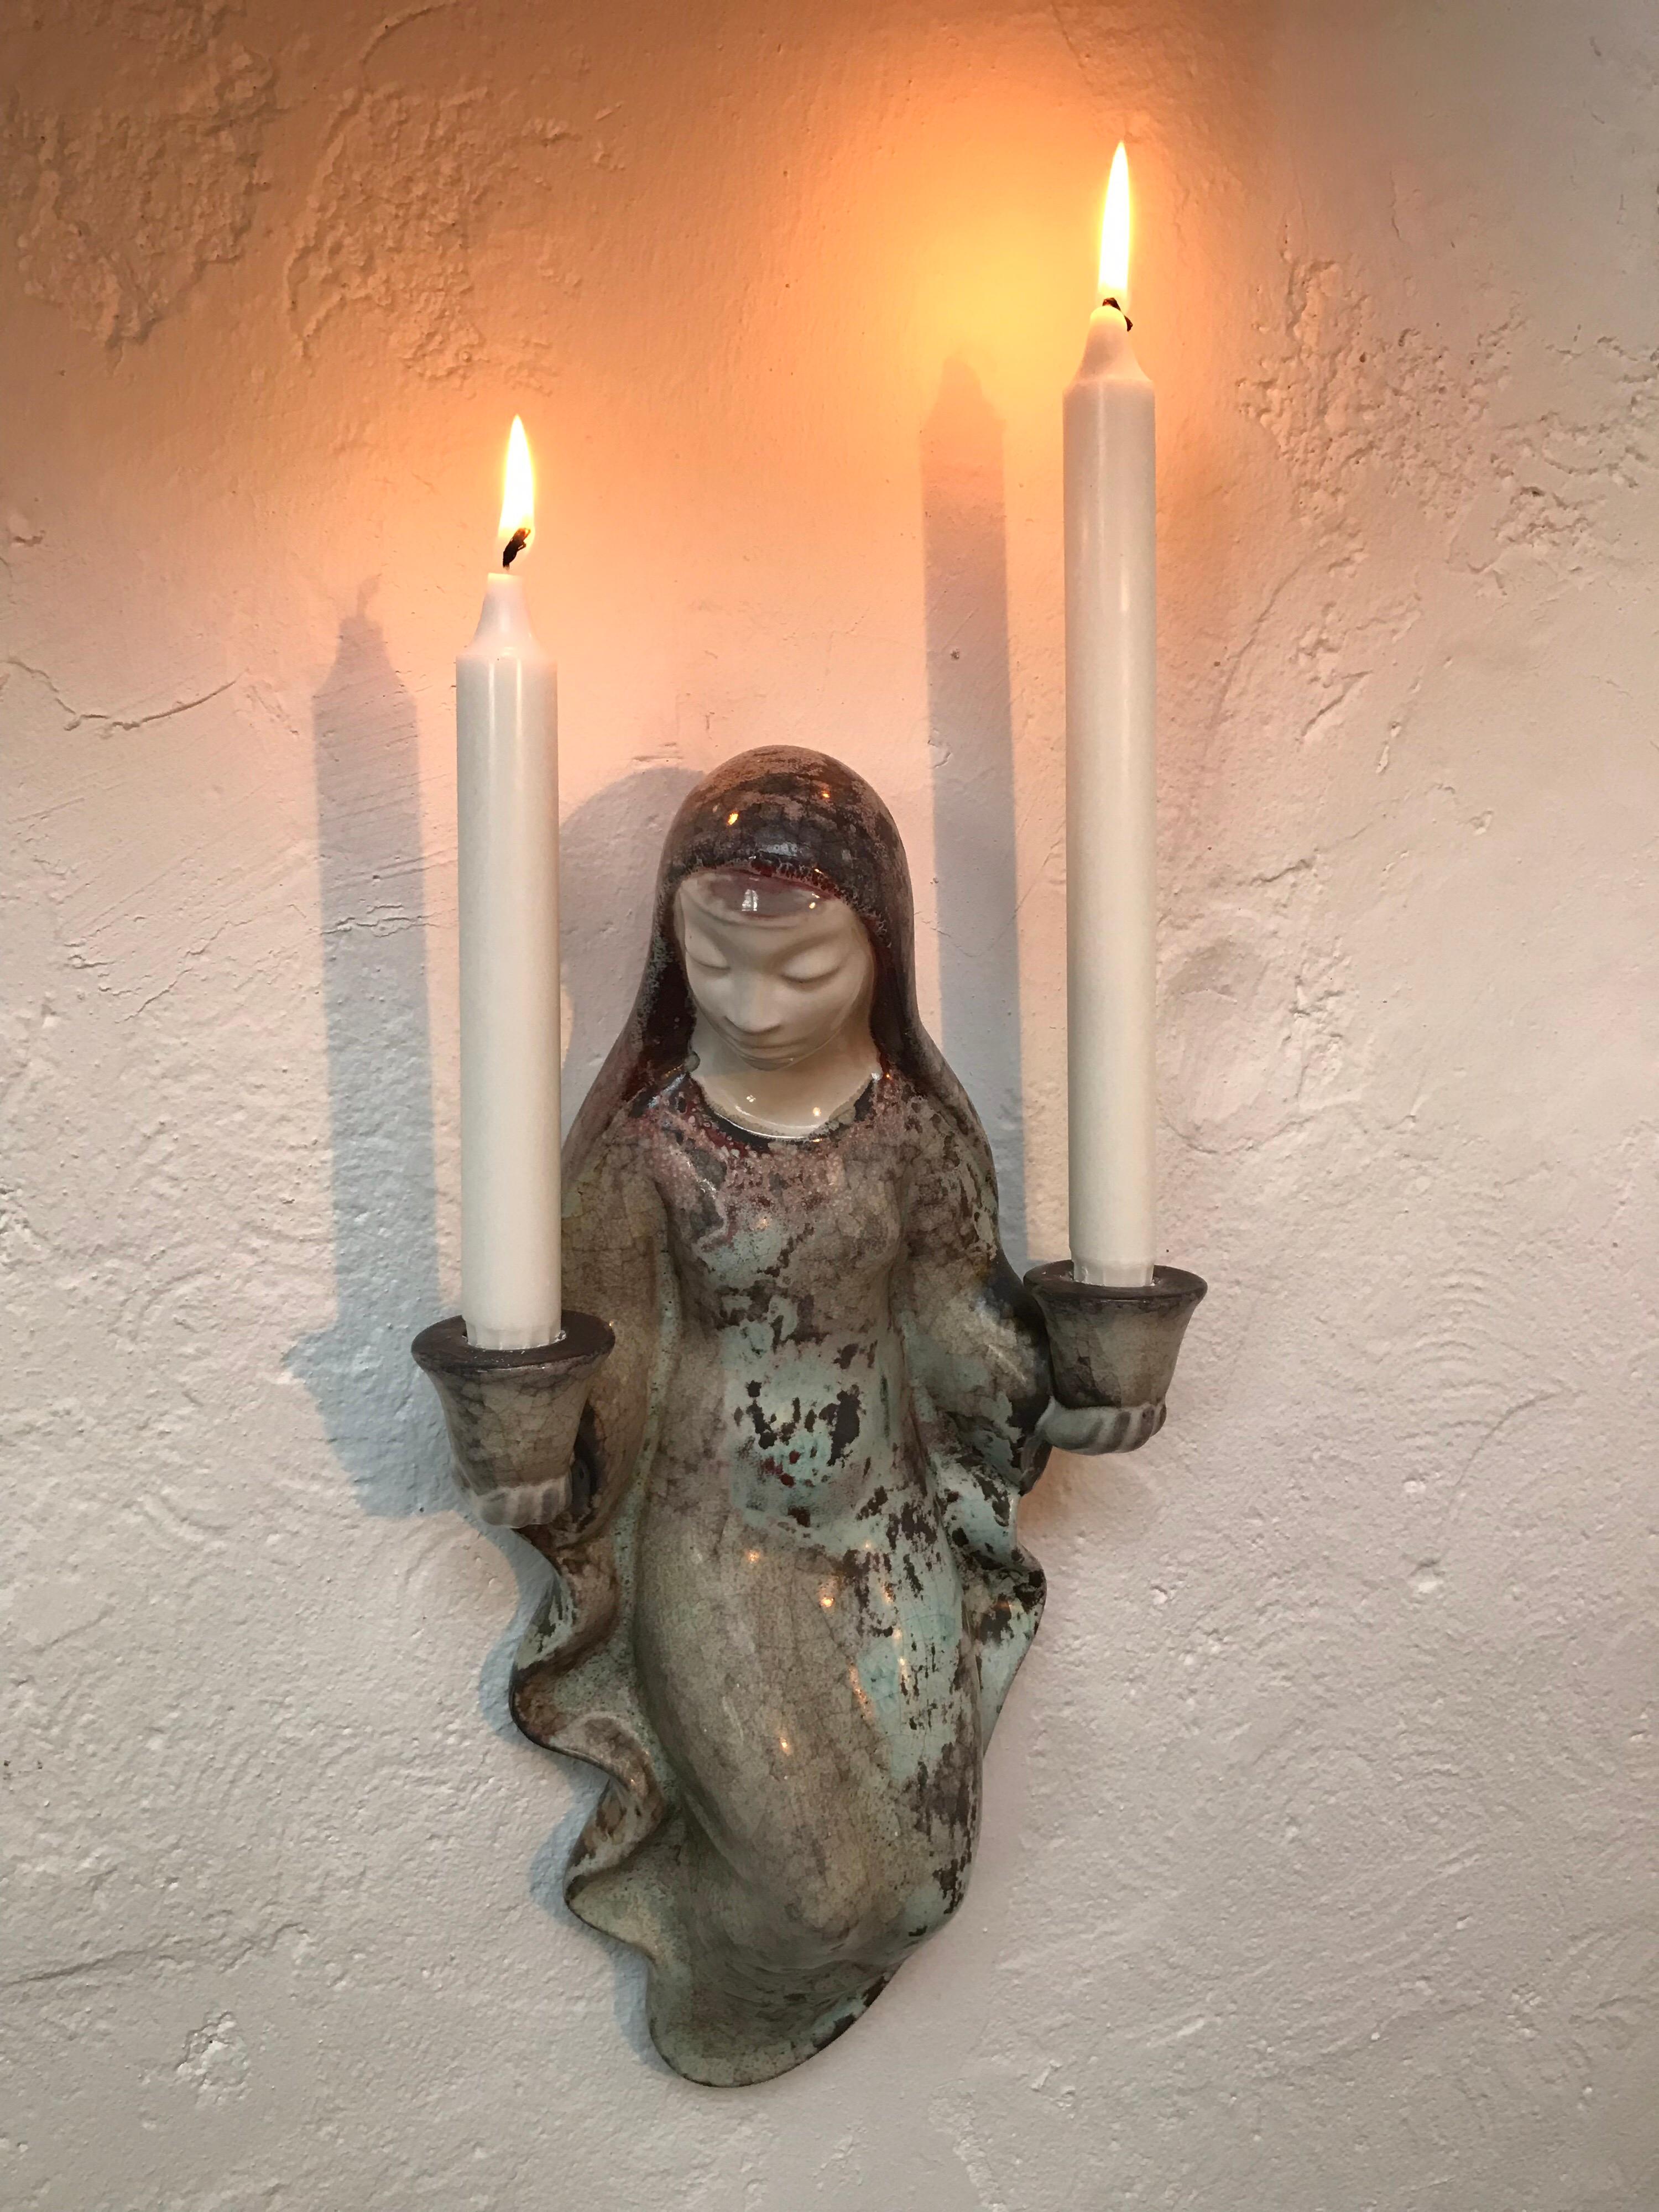 Vintage Michael Andersen ceramic candleholder possibly in the form of a Madonna 
Achingly beautiful and such a wonderful piece of faience 
Michael Andersen started producing ceramics in 1771 in Rønne on the island of Bornholm Denmark and today has